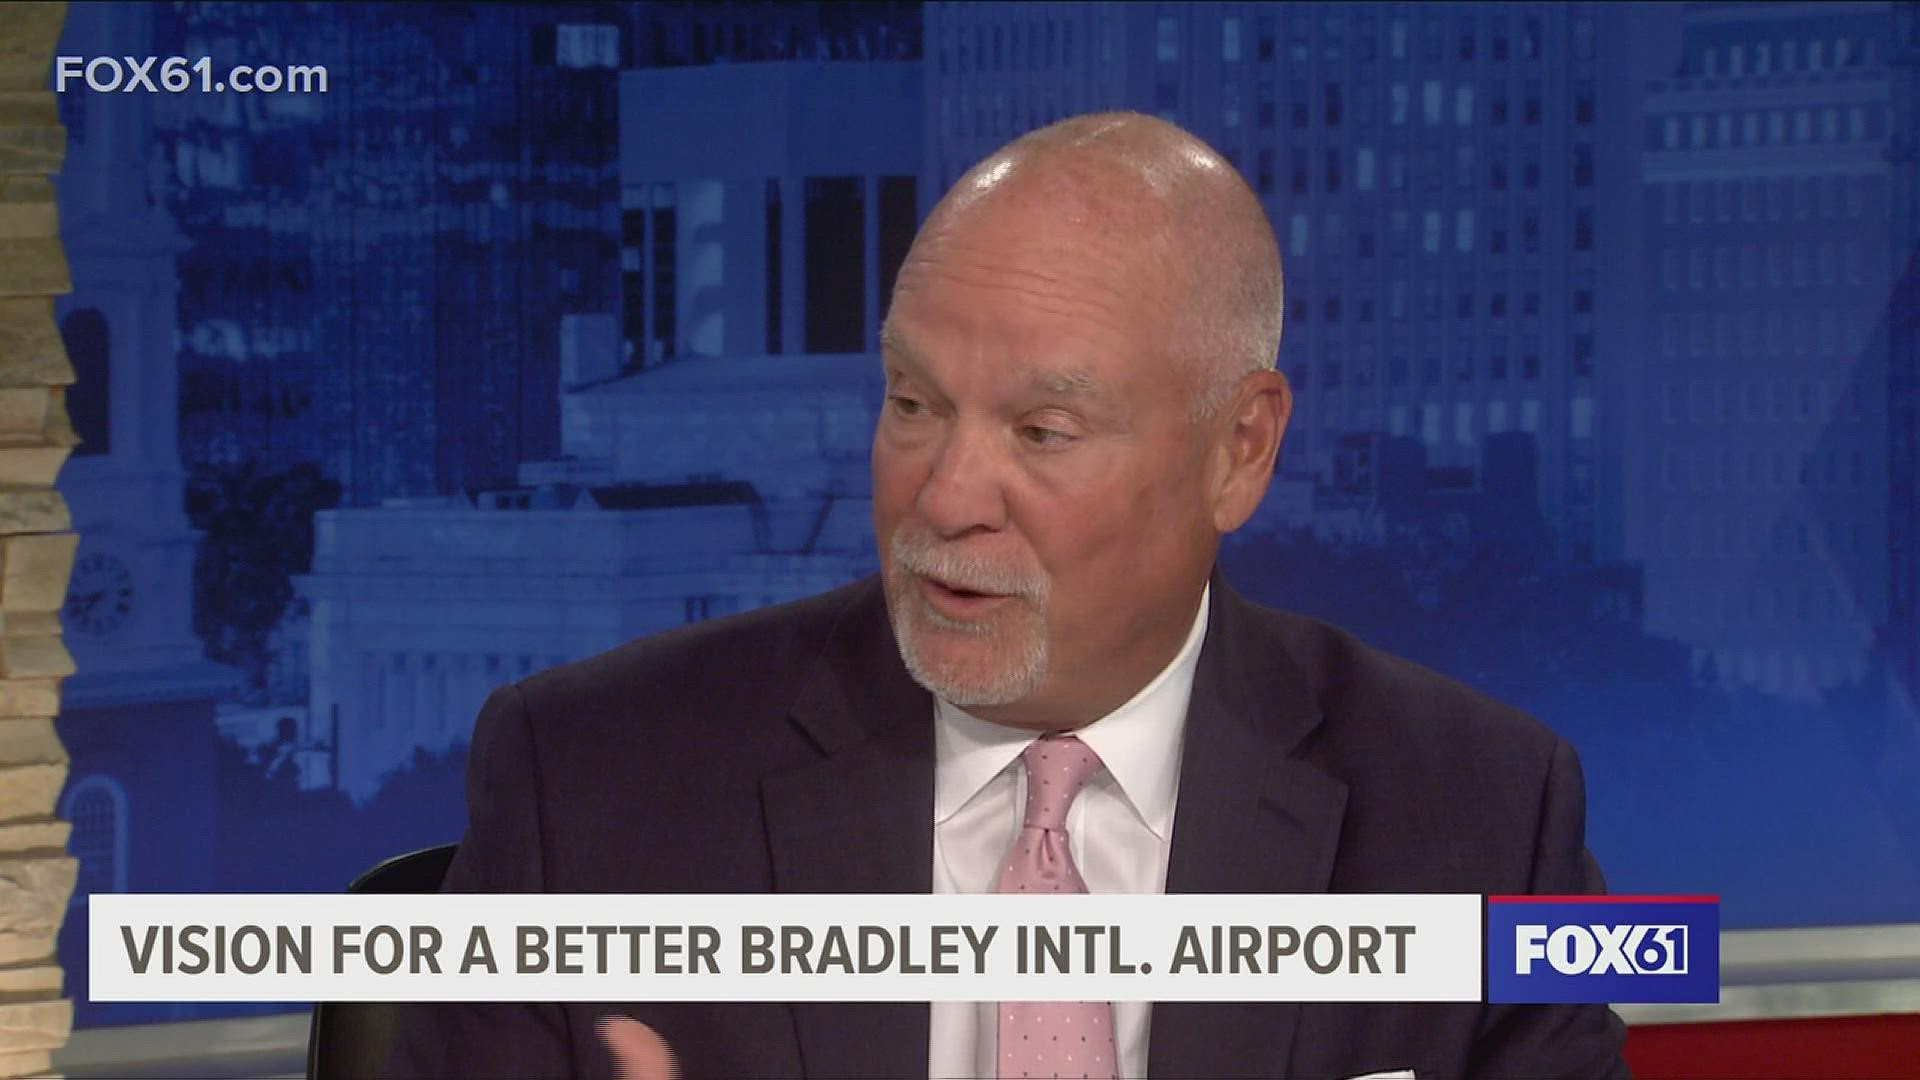 Kevin Dillion, CT Airport Authority, talks about Aer Lingus flights resuming and a new ranking for BDL